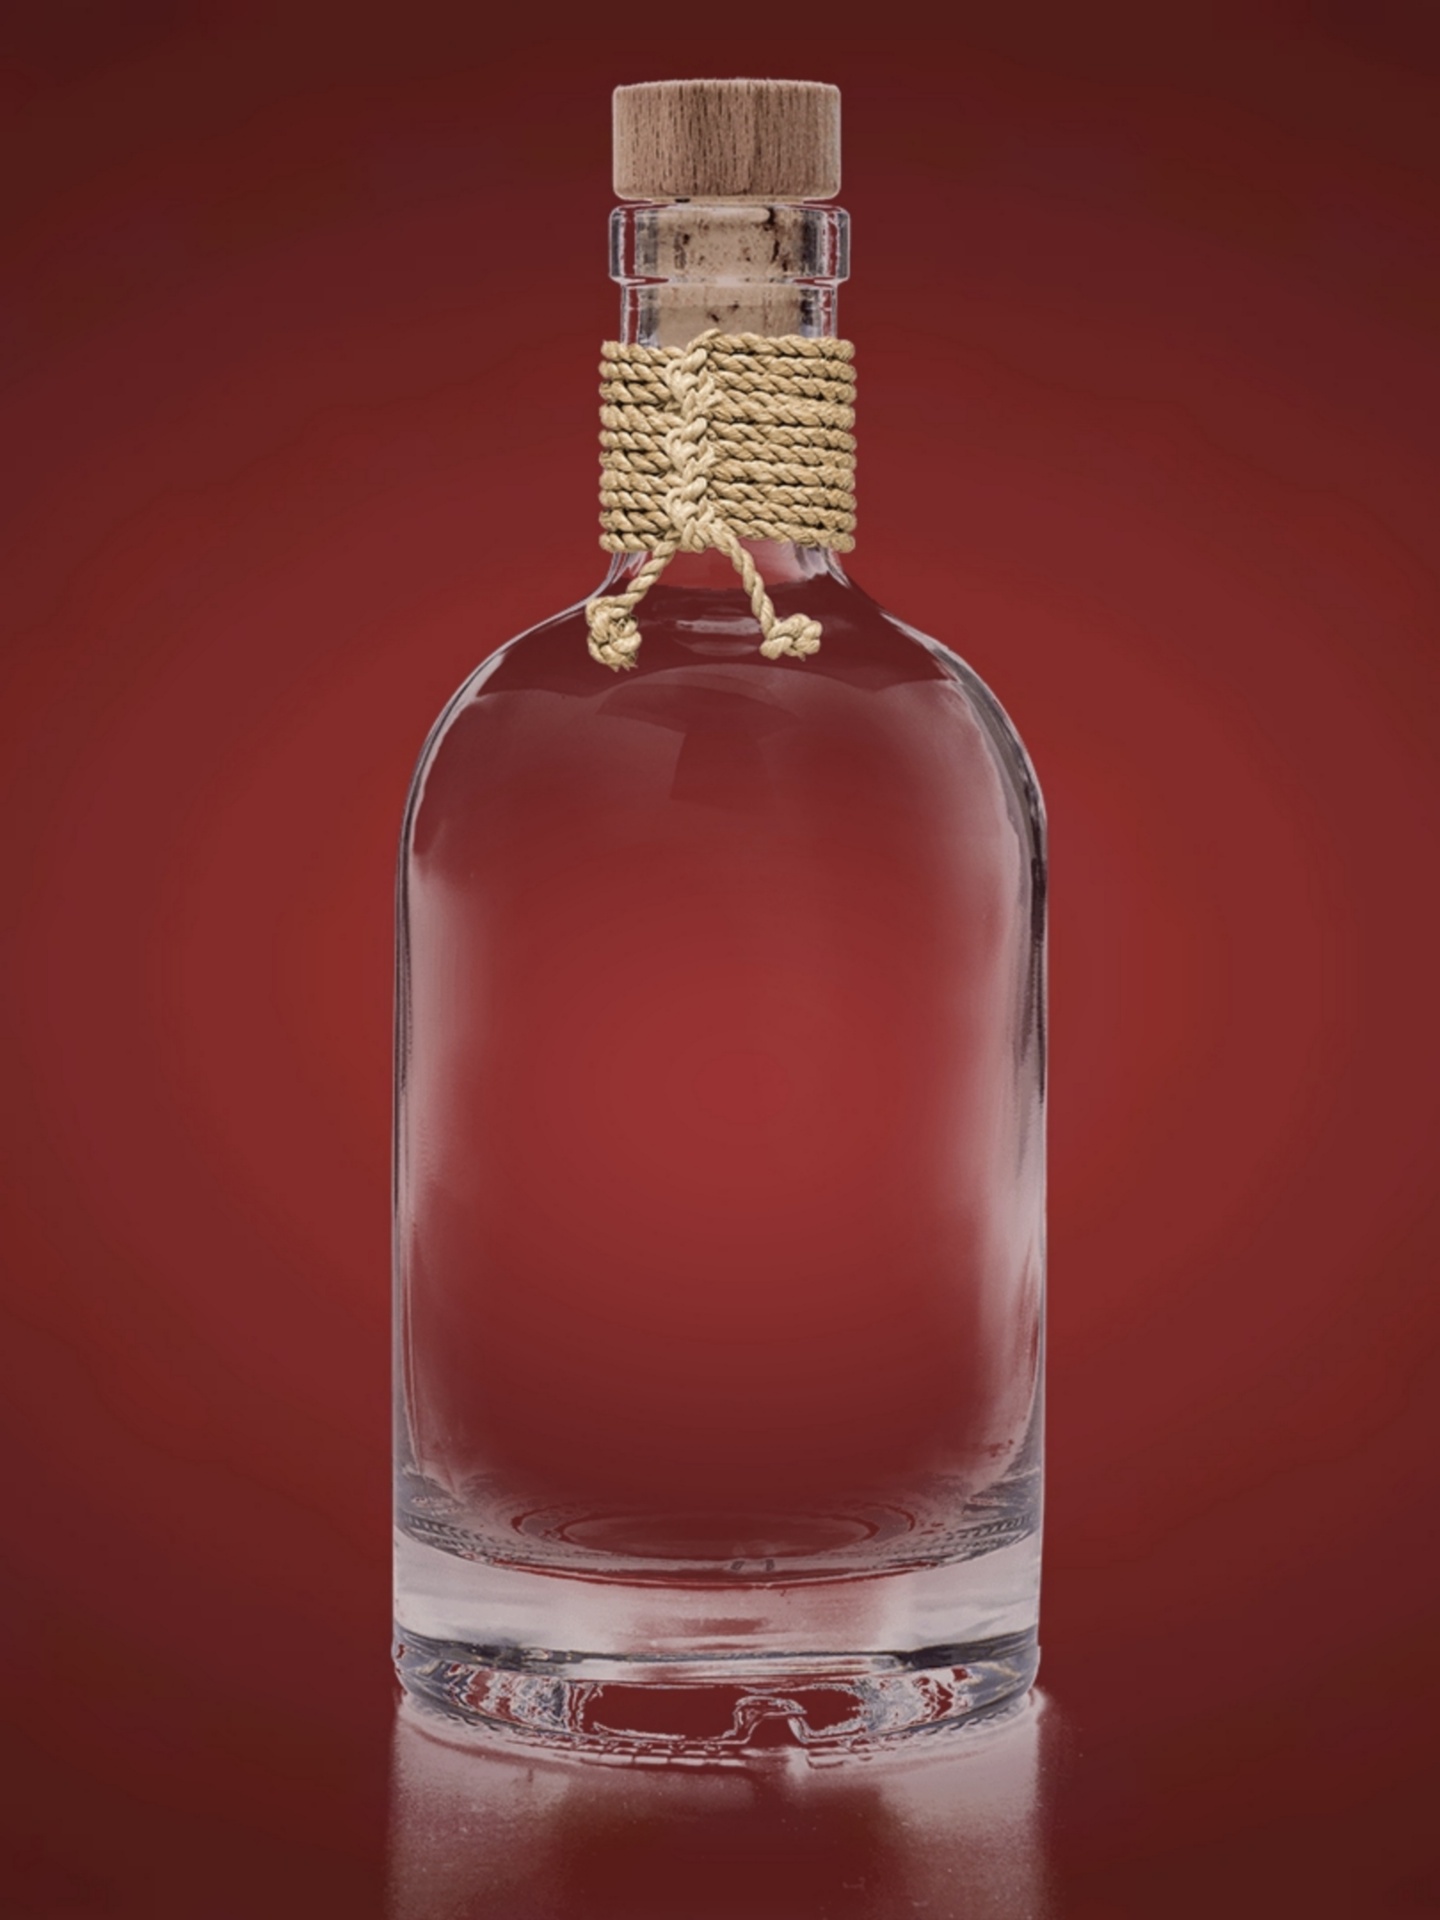 red bottle on red background